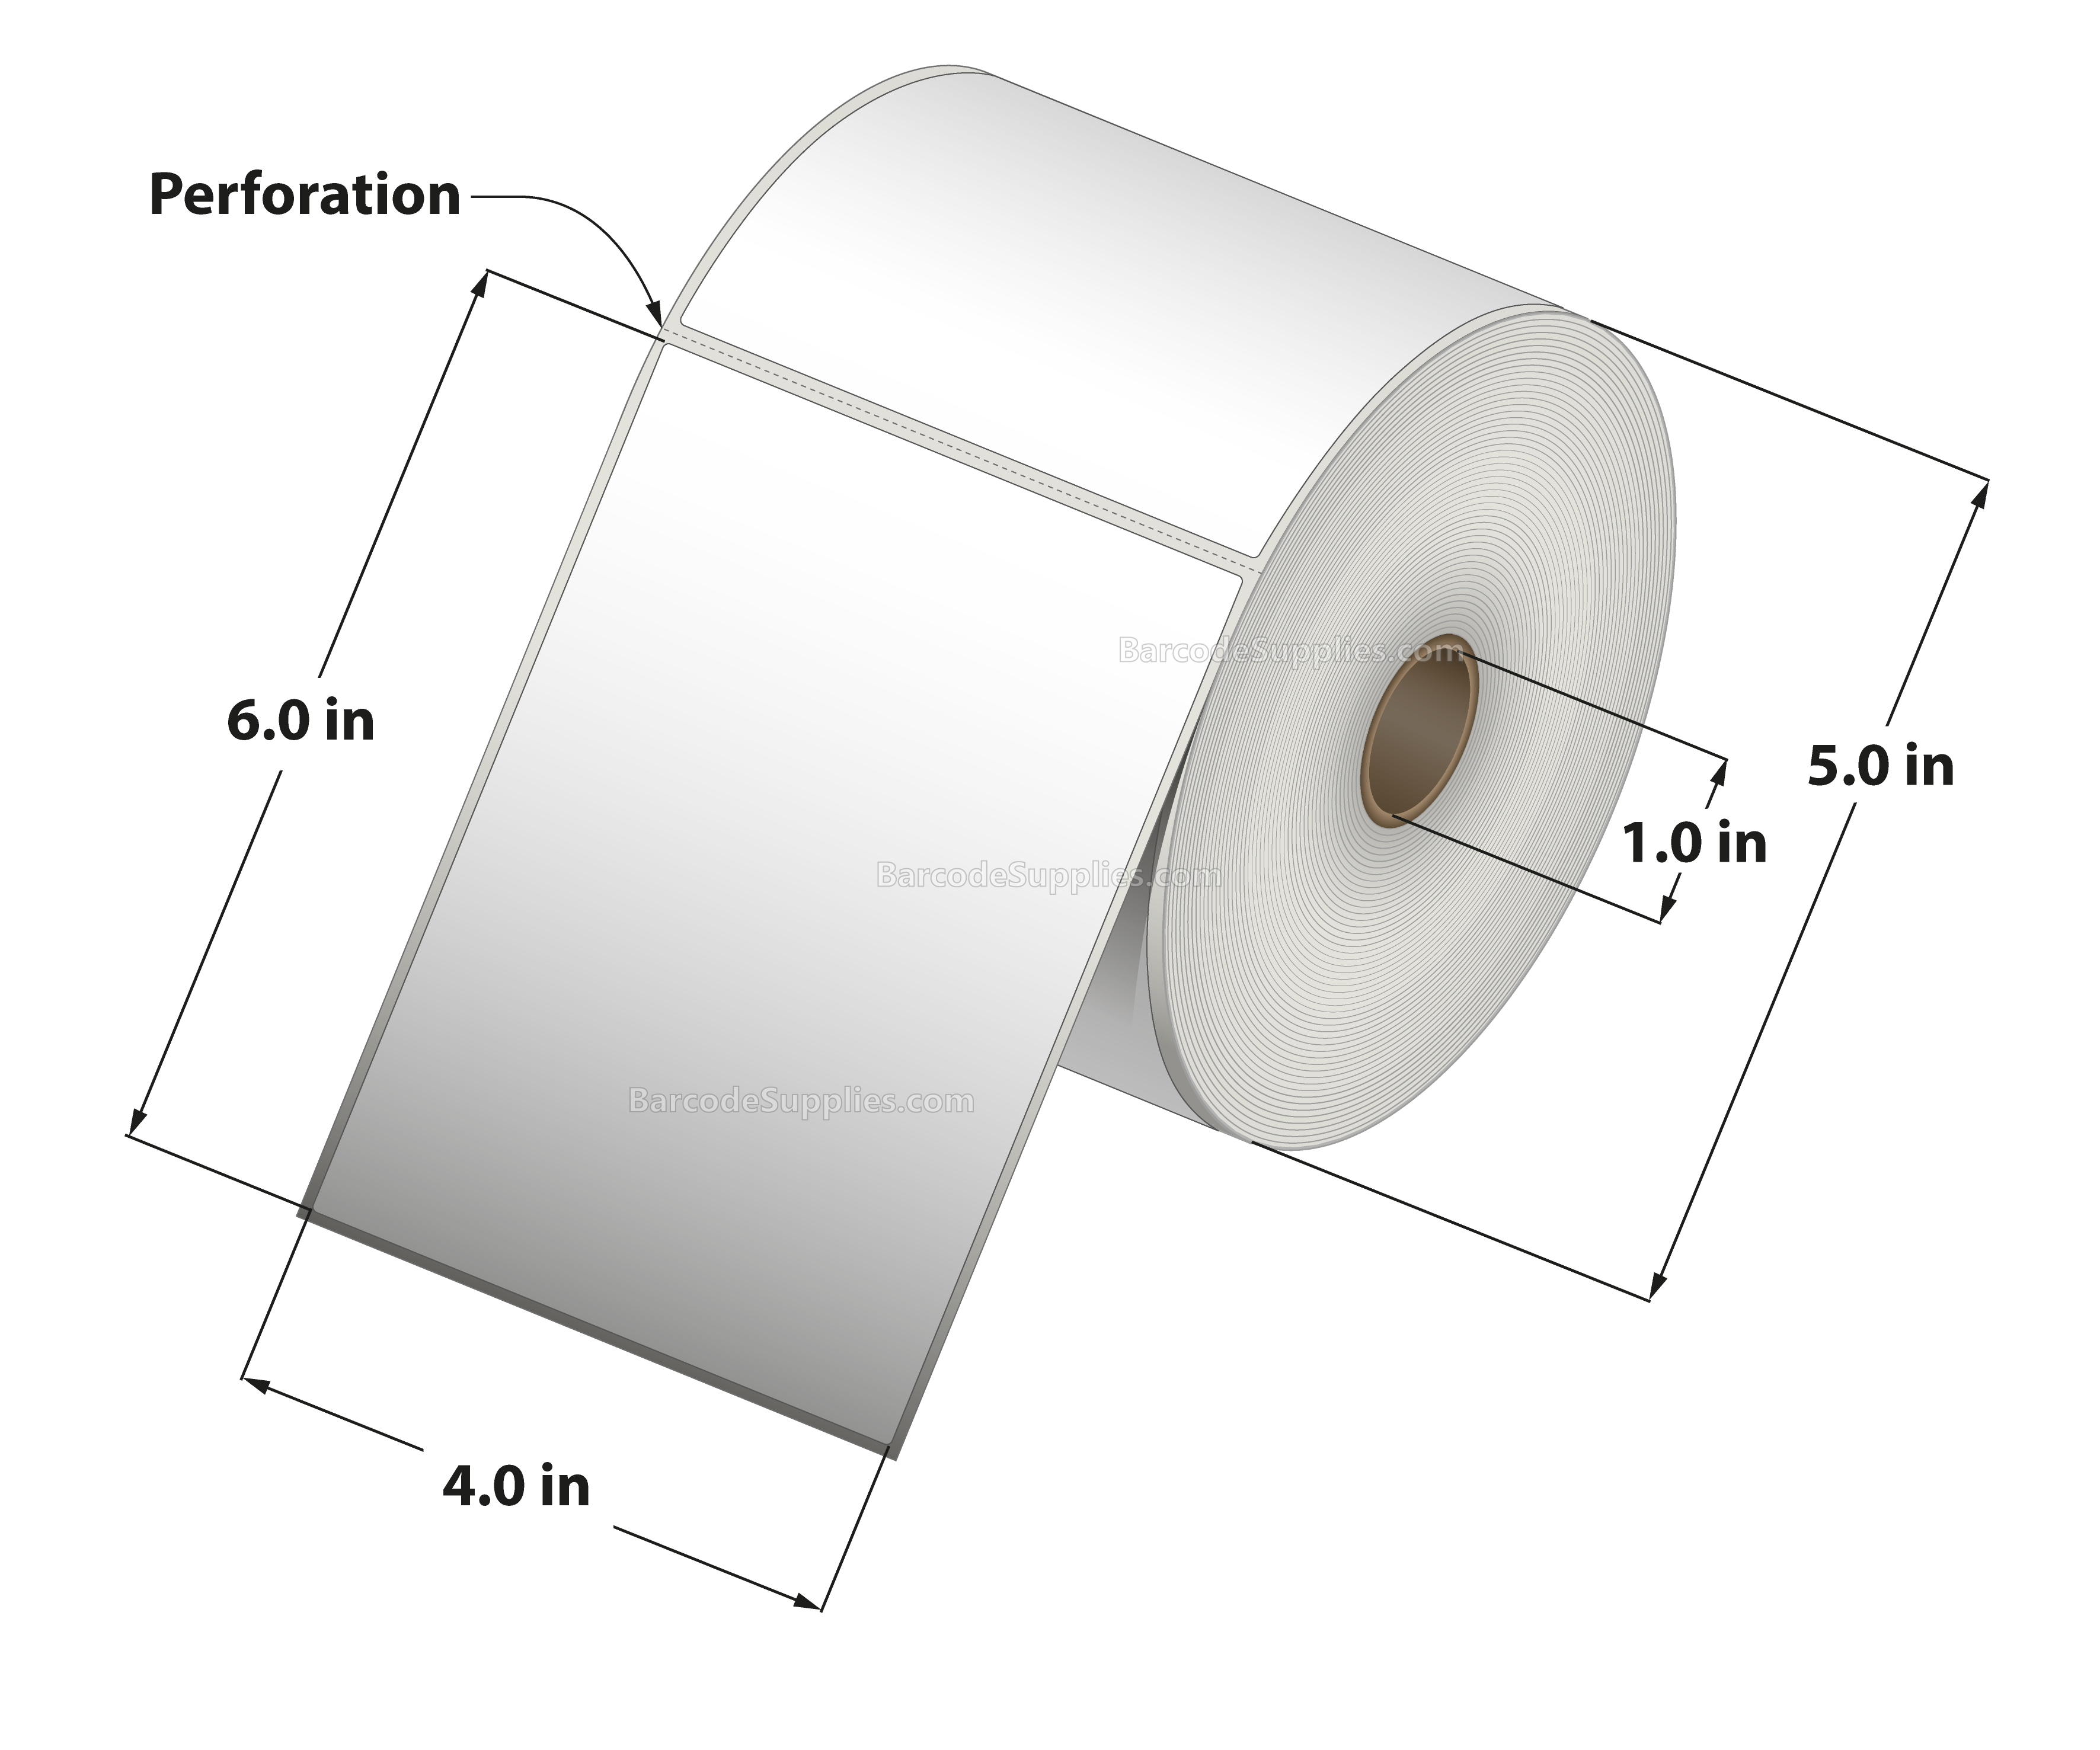 4 x 6 Direct Thermal White Labels With Acrylic Adhesive - Perforated - 460 Labels Per Roll - Carton Of 12 Rolls - 5520 Labels Total - MPN: RD-4-6-460-1 - BarcodeSource, Inc.